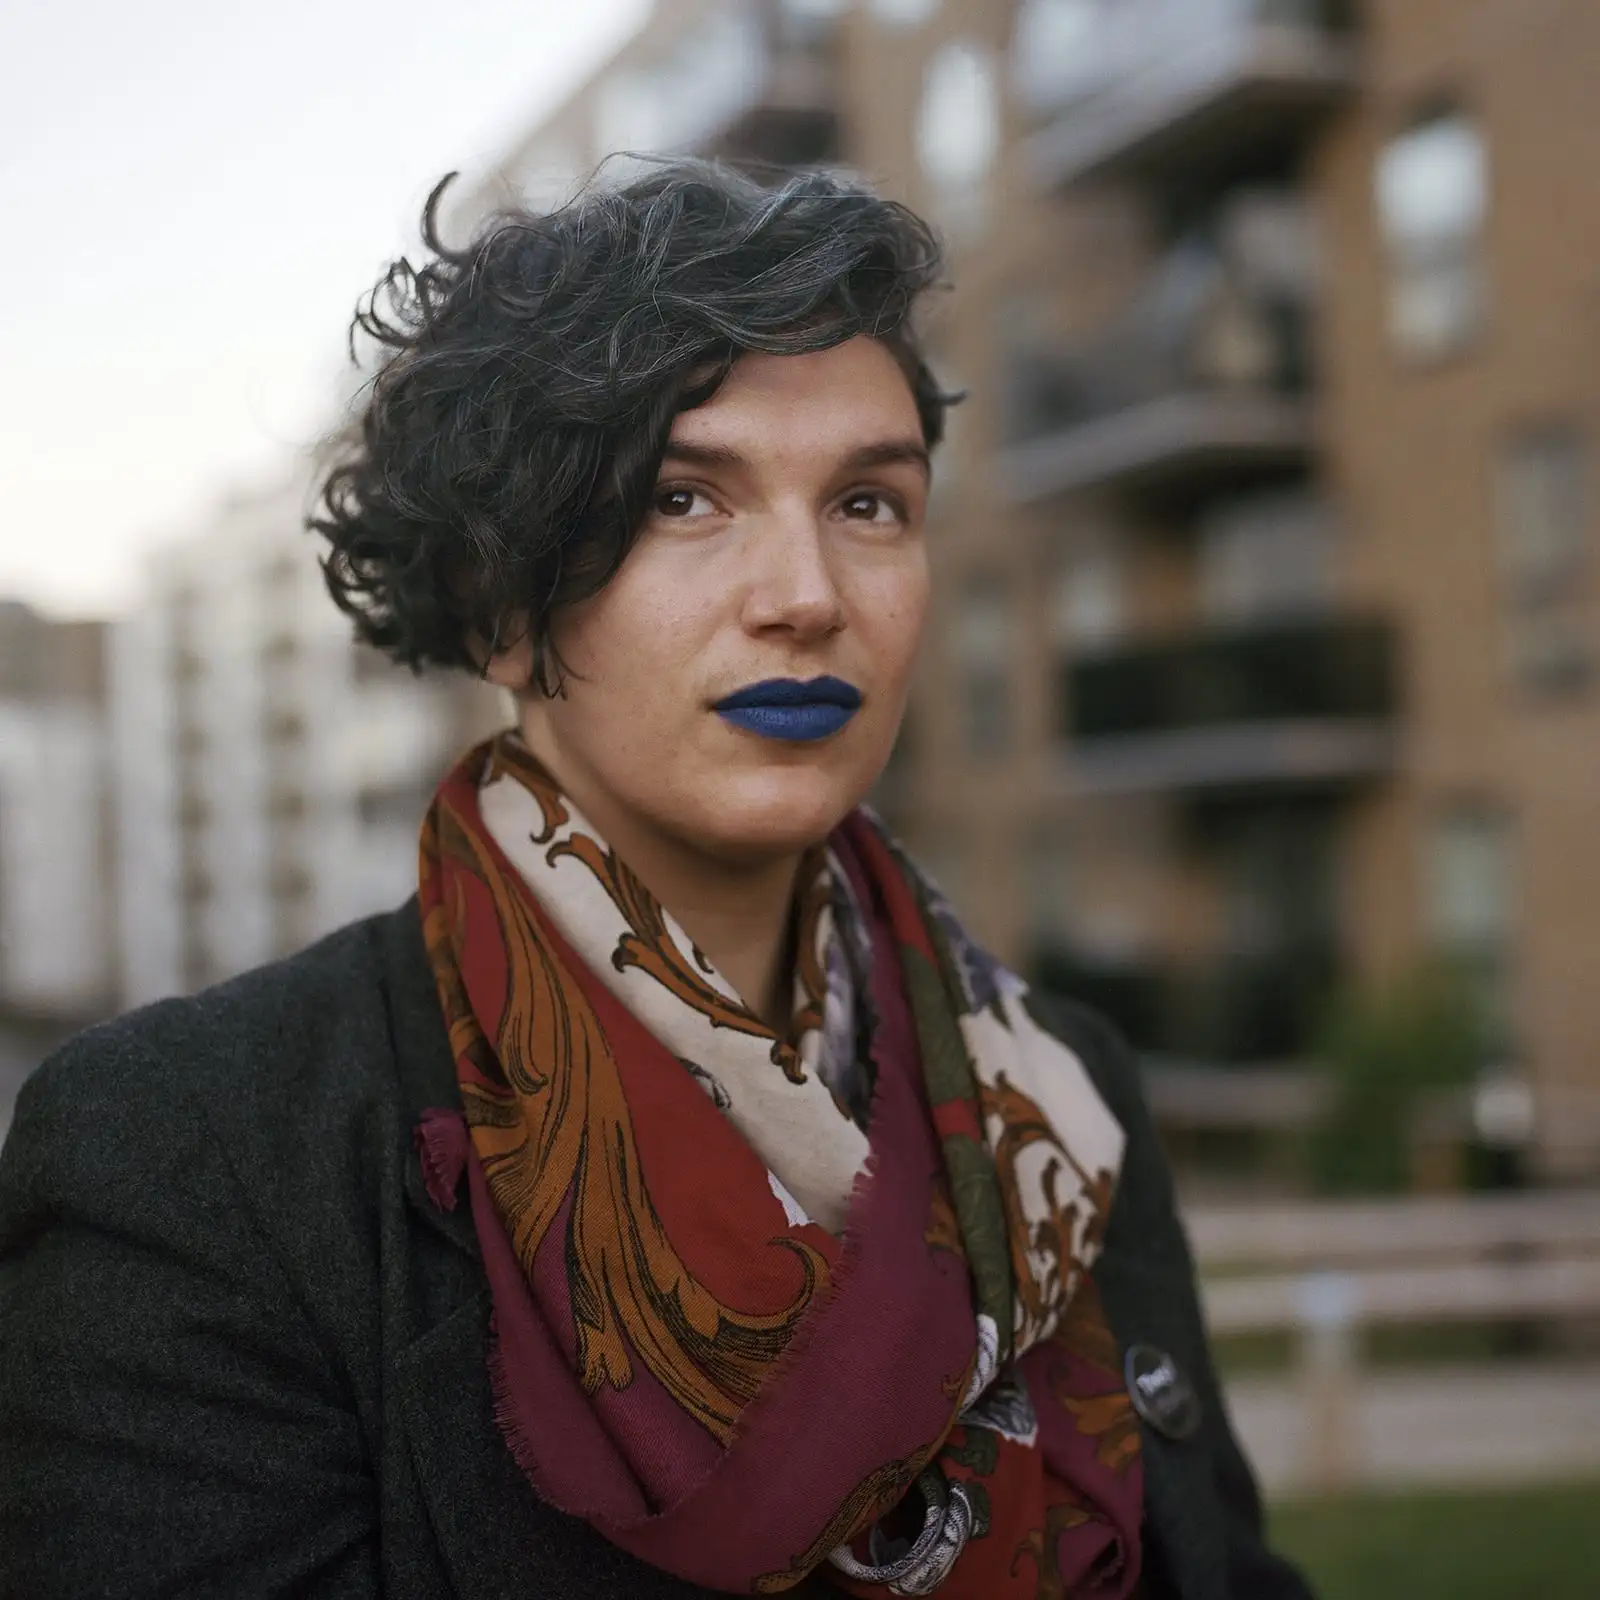 Photo series challenges what a non-binary person looks like